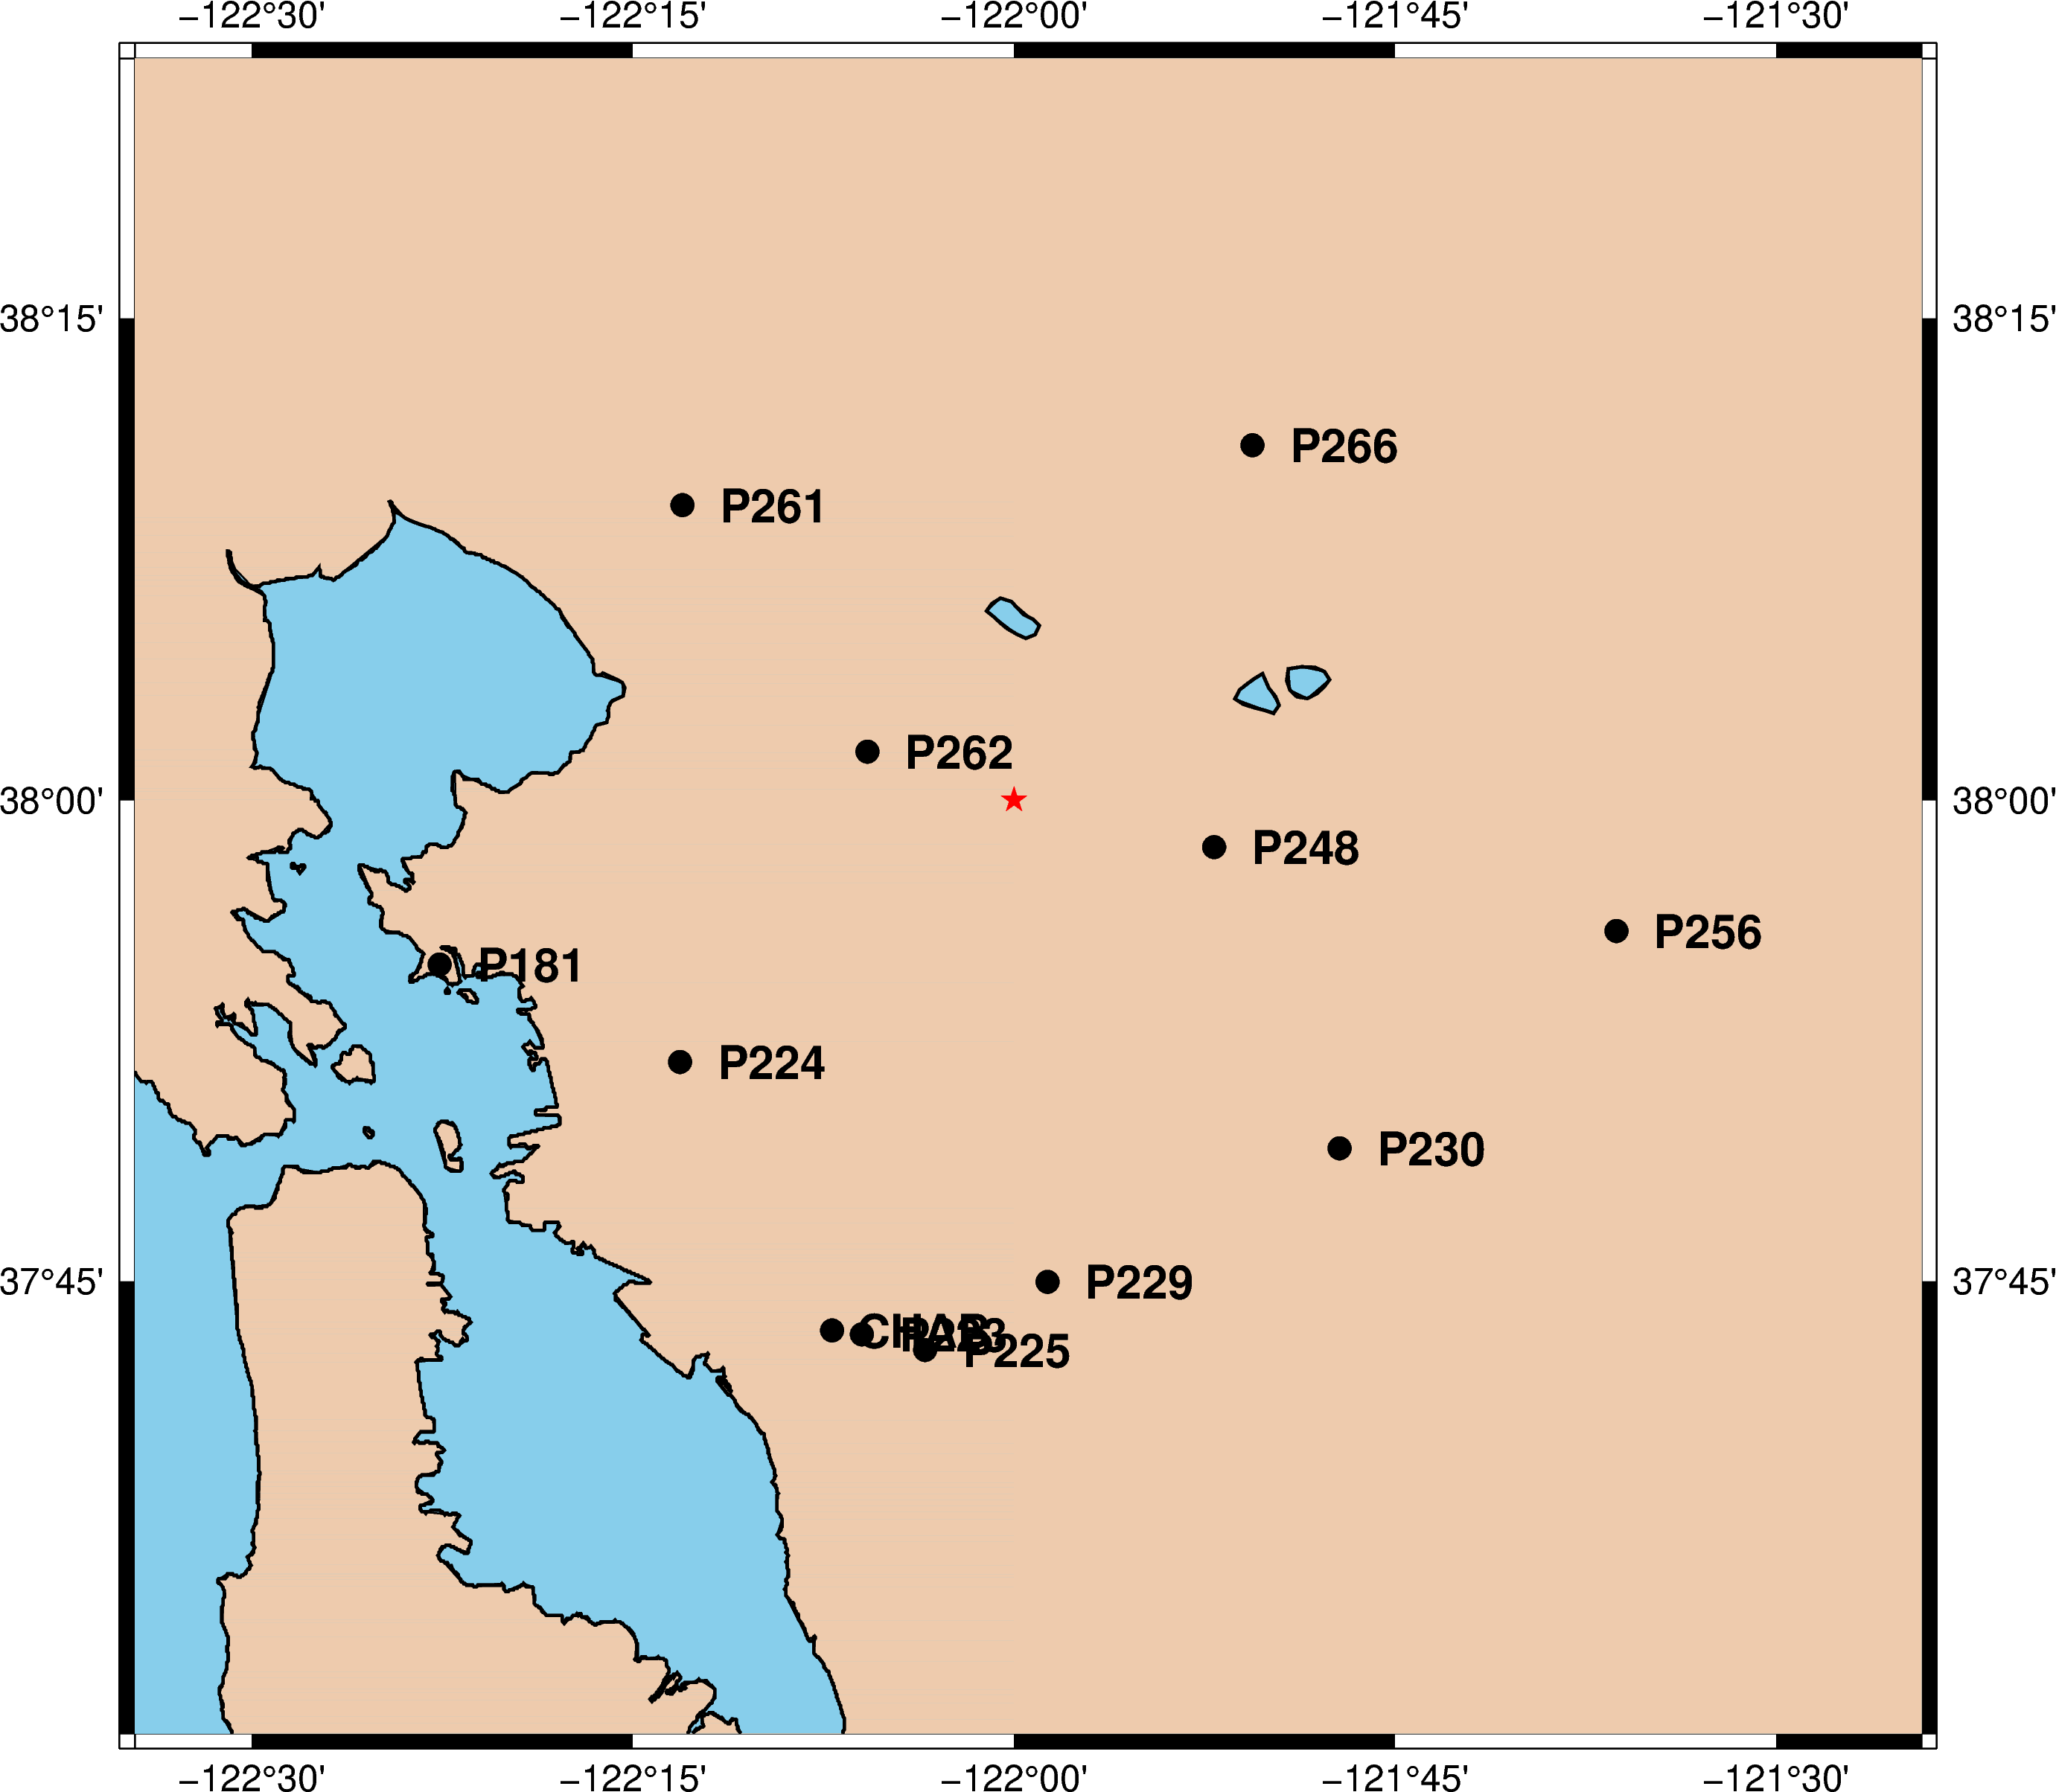 NBay_-122.0_38.0_40_map.png